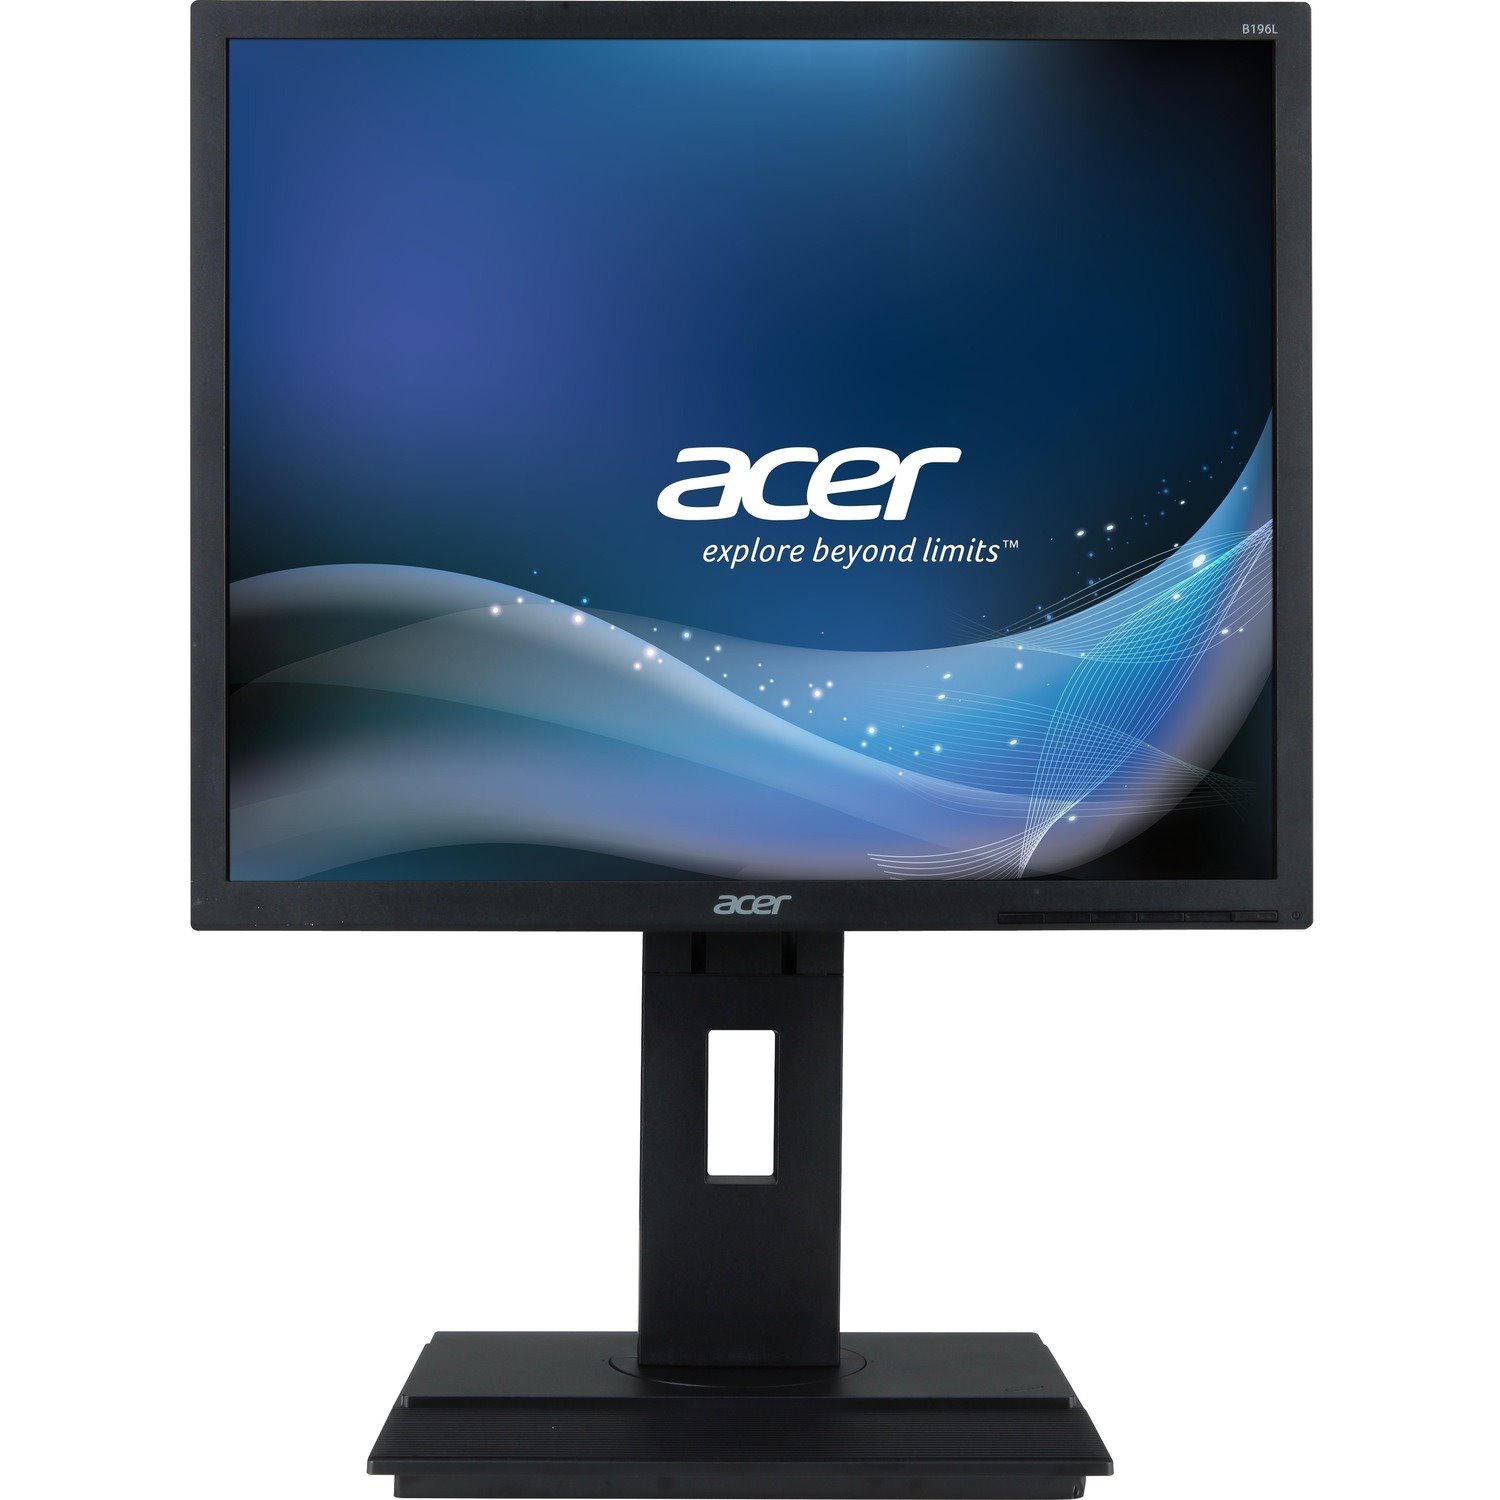 Acer B196L 19" LED LCD Monitor - 4:3 - 5ms - Free 3 year Warranty